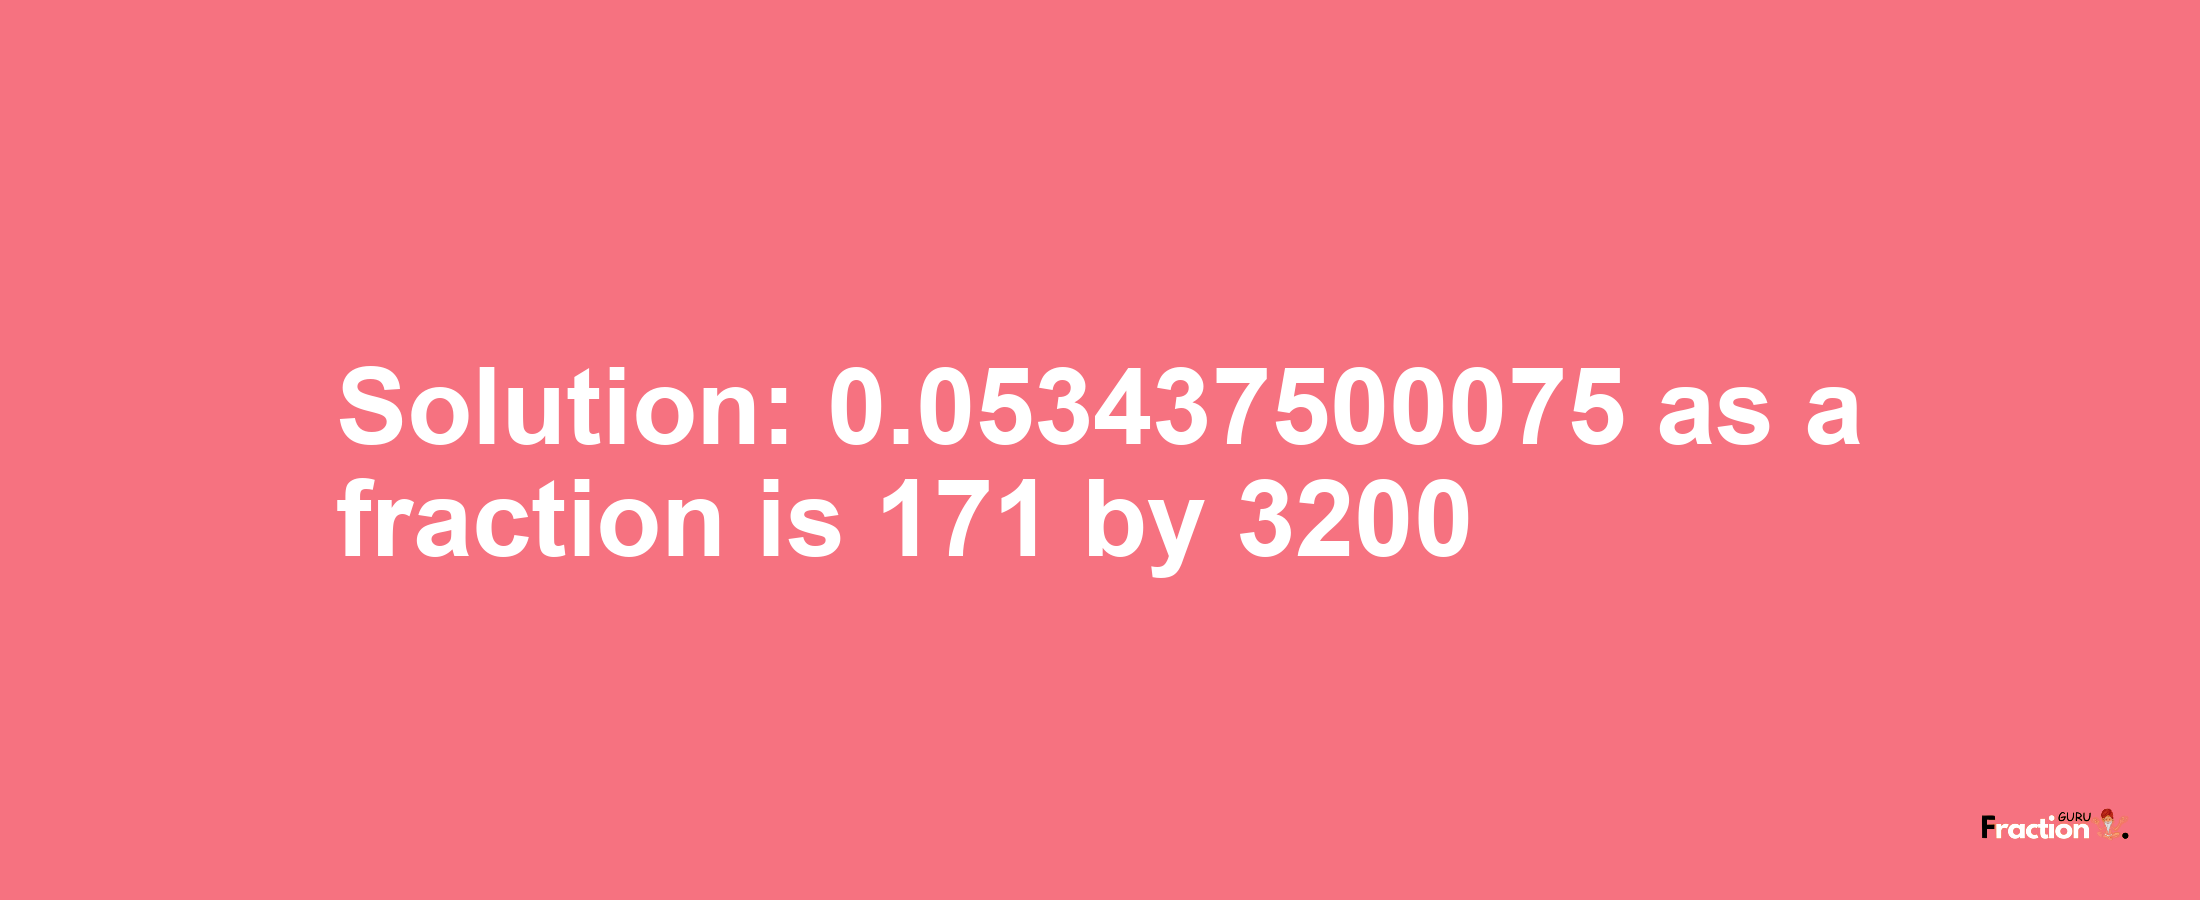 Solution:0.053437500075 as a fraction is 171/3200